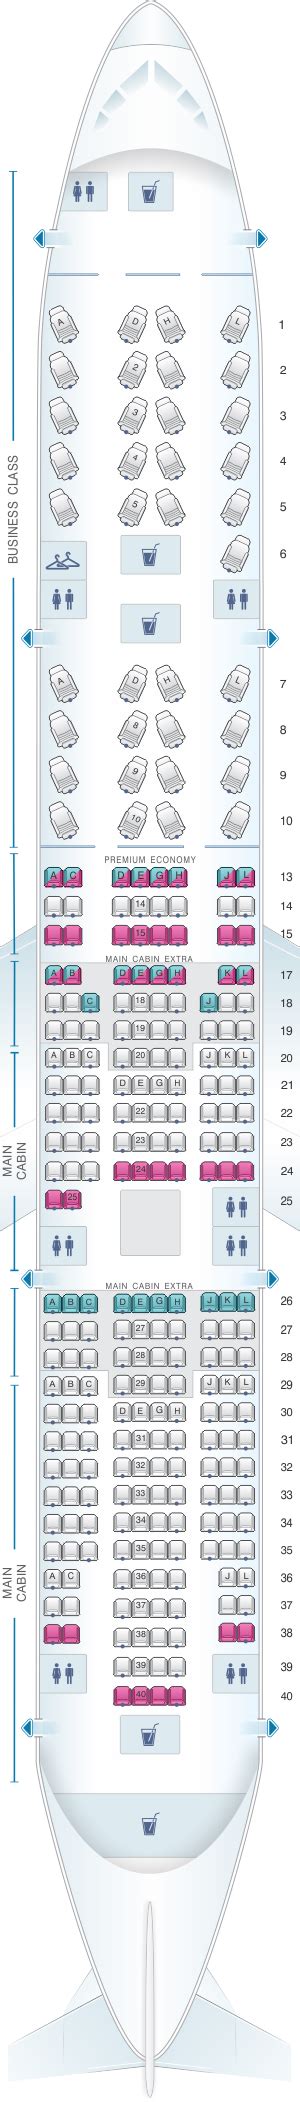 Boeing 777 200er Seating Chart American Airlines Elcho Table